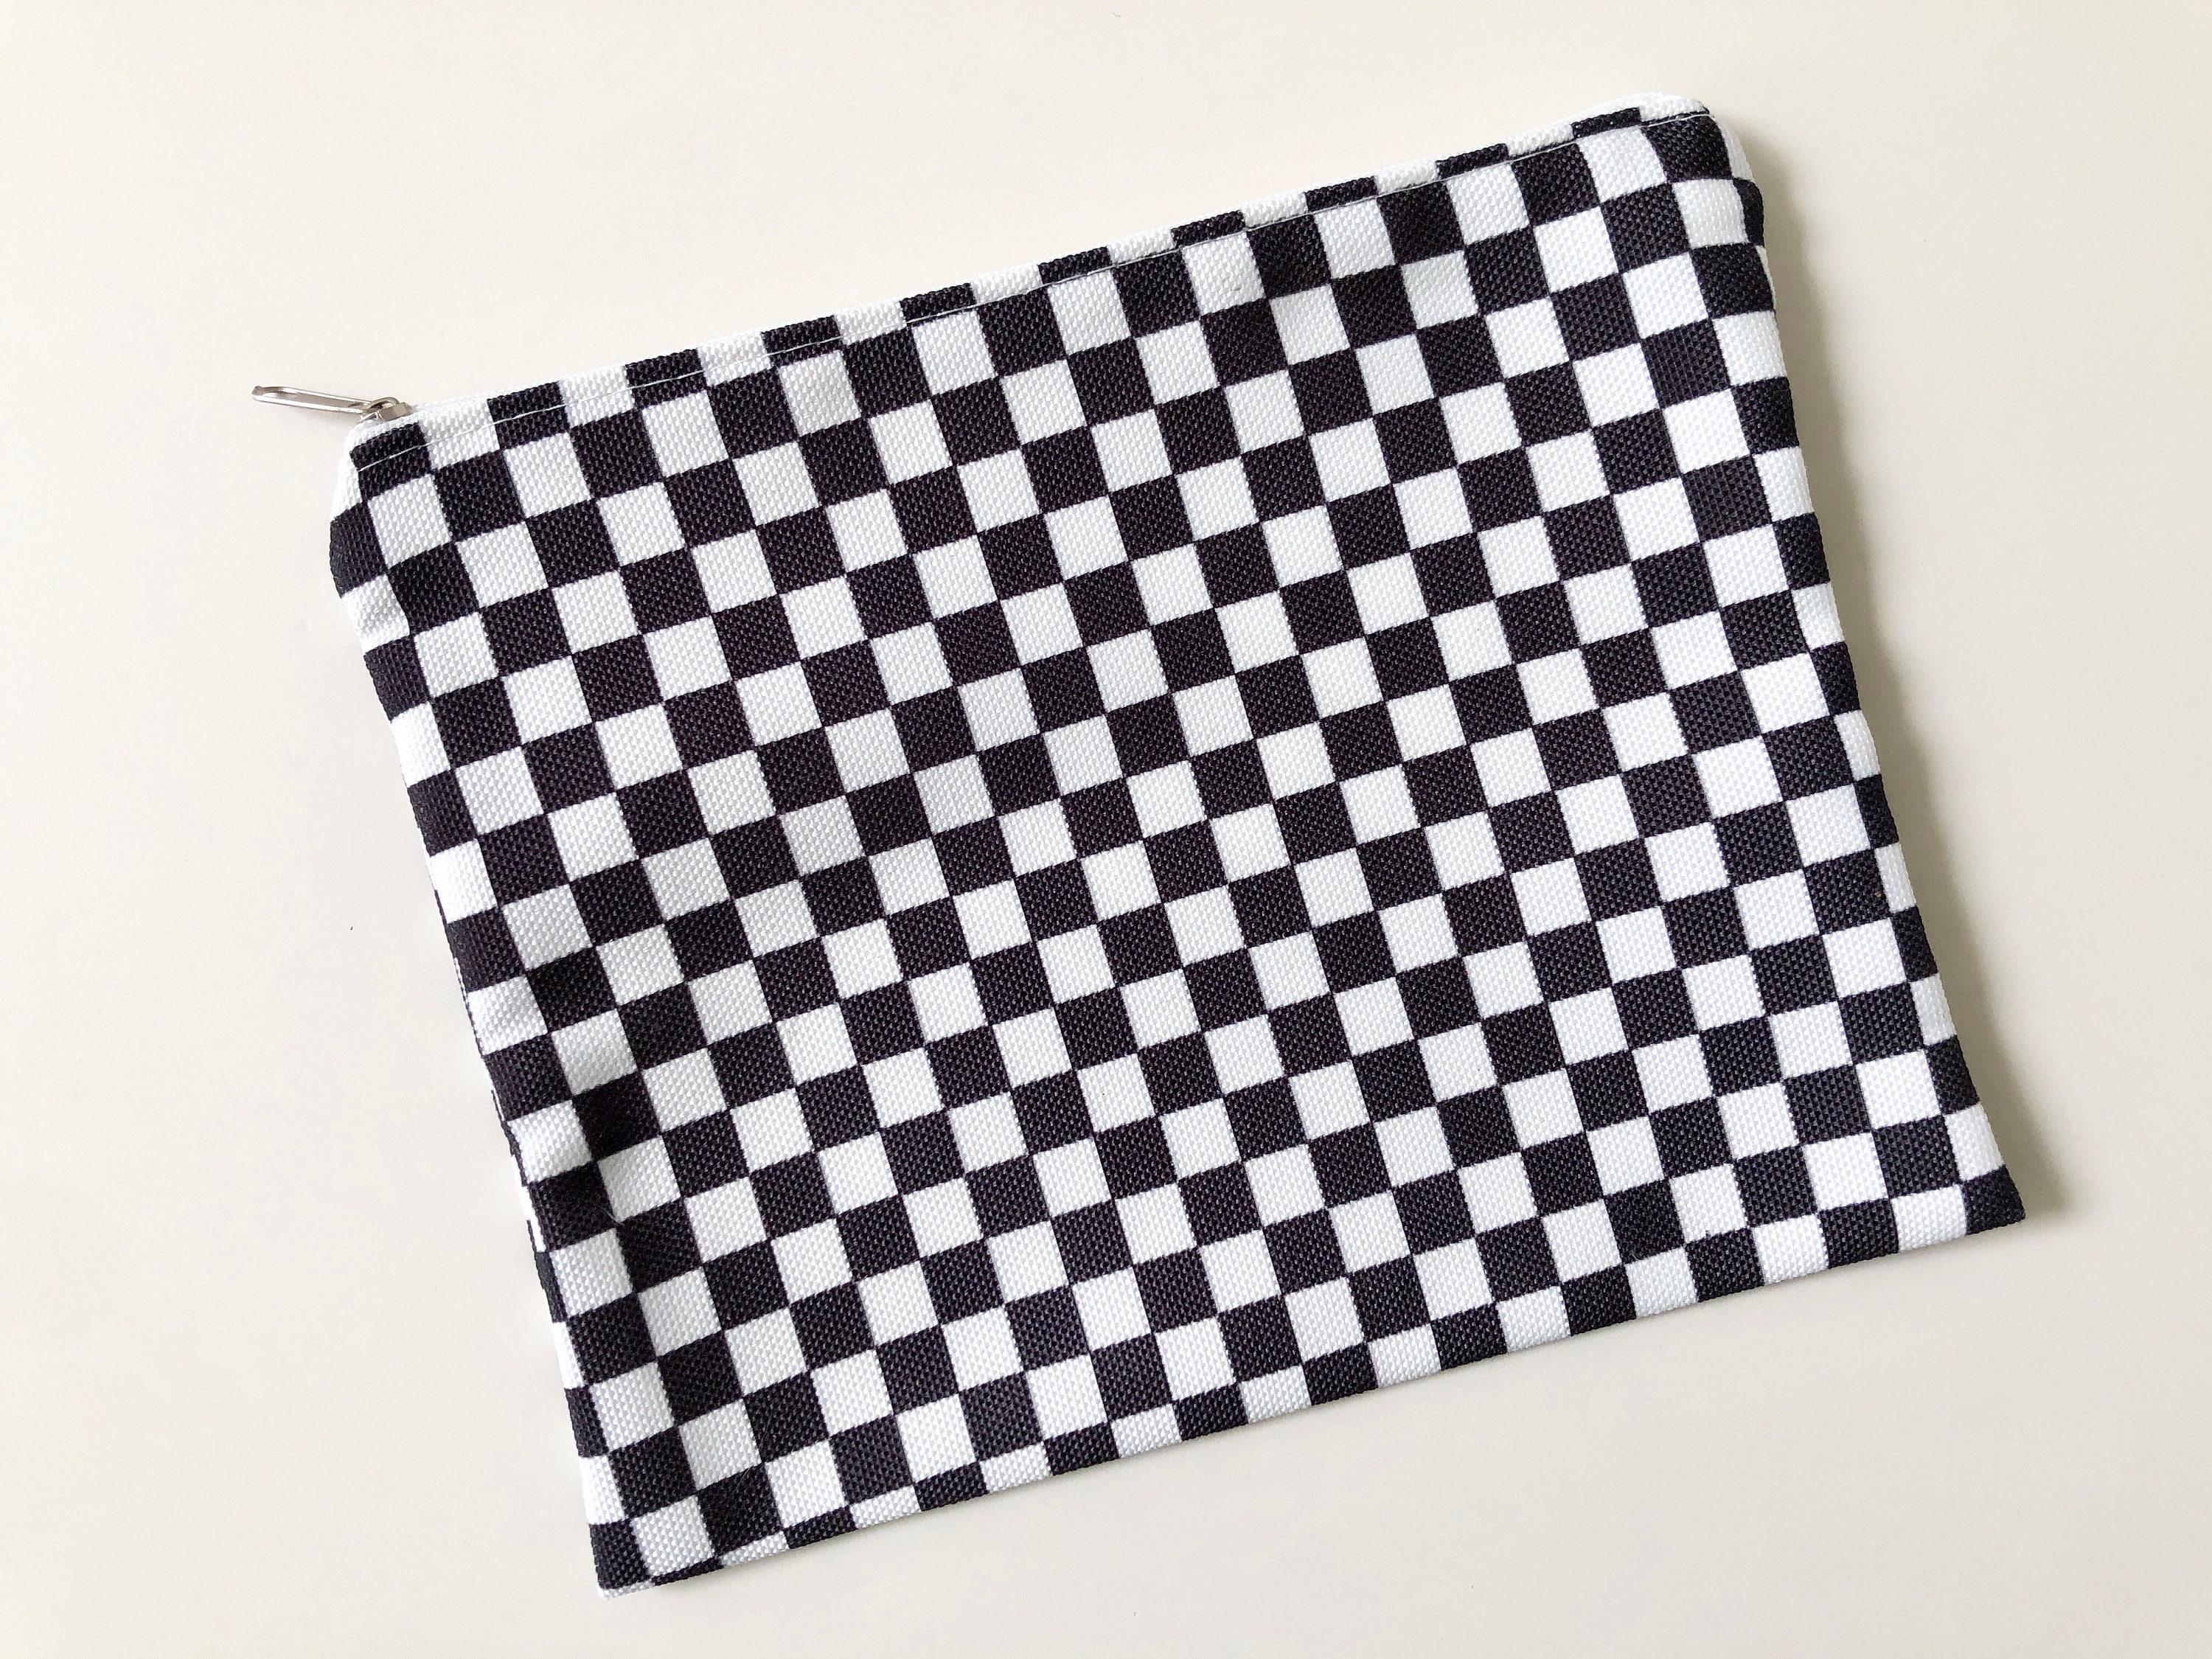 Black And White Printed Checkered cosmetic Zipper Jute Bag, Size: 7 X 5 X 4  Inch